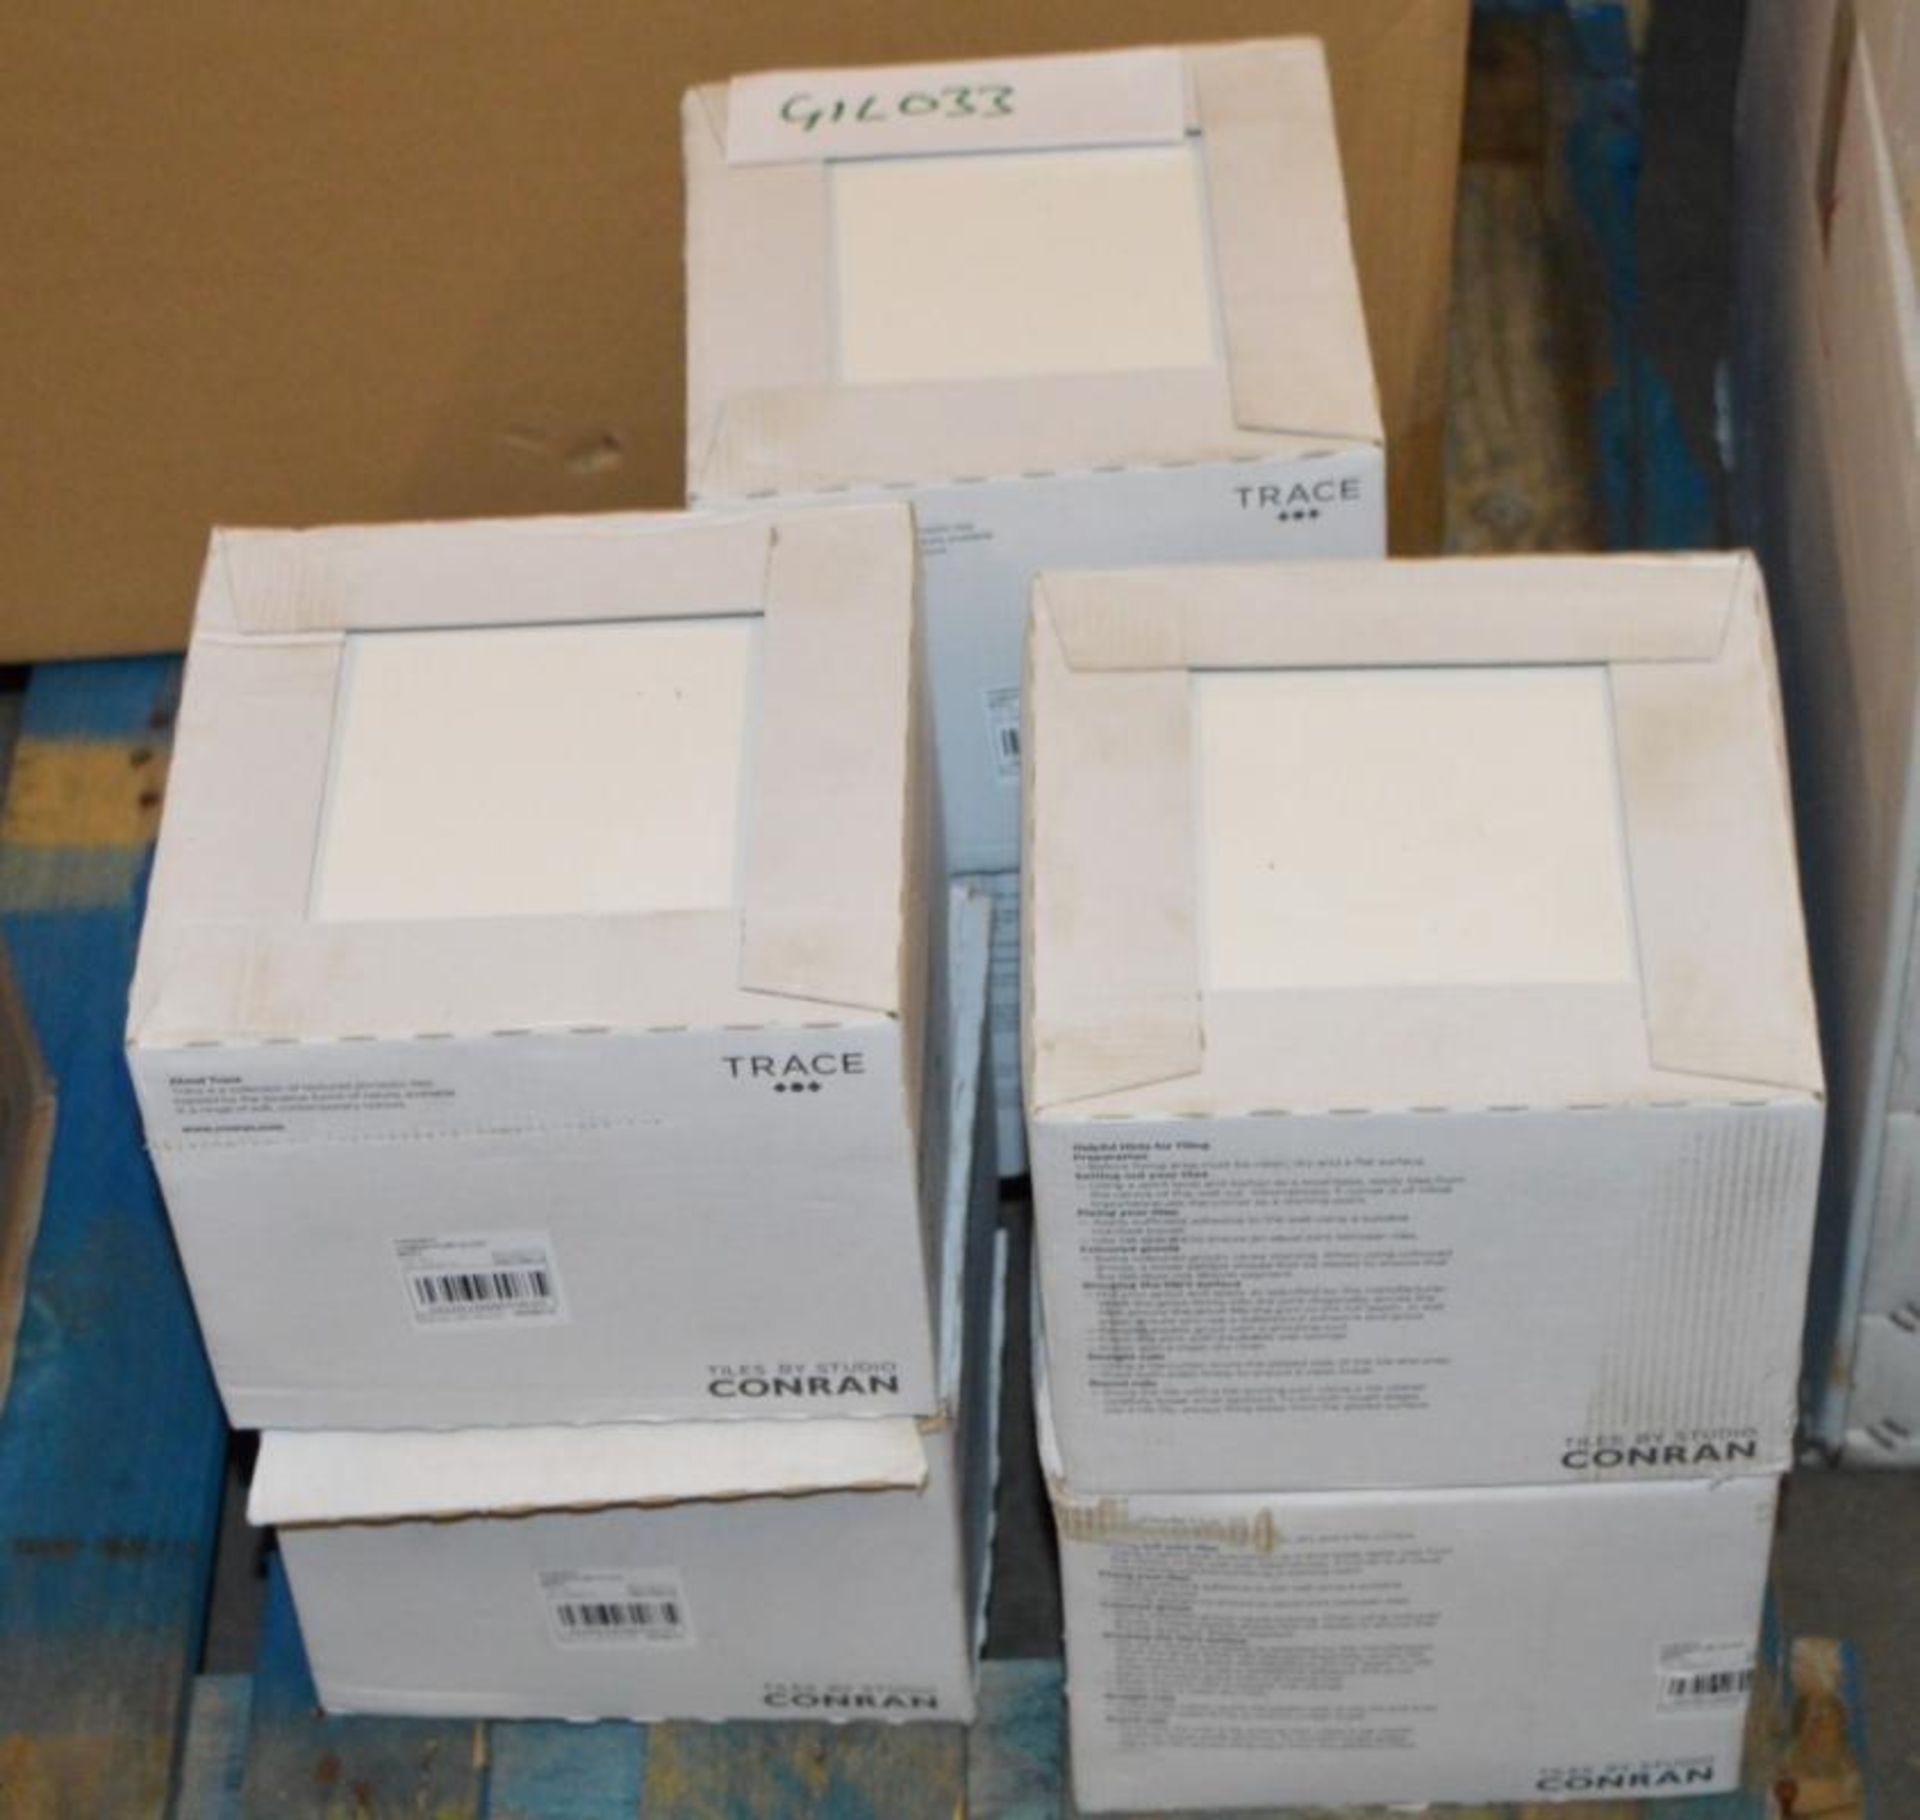 6 x Boxes of Conran Glazed Ceramic Wall Tiles in Gloss White - Size 200 x 200mm - Each Box Contains - Image 4 of 4